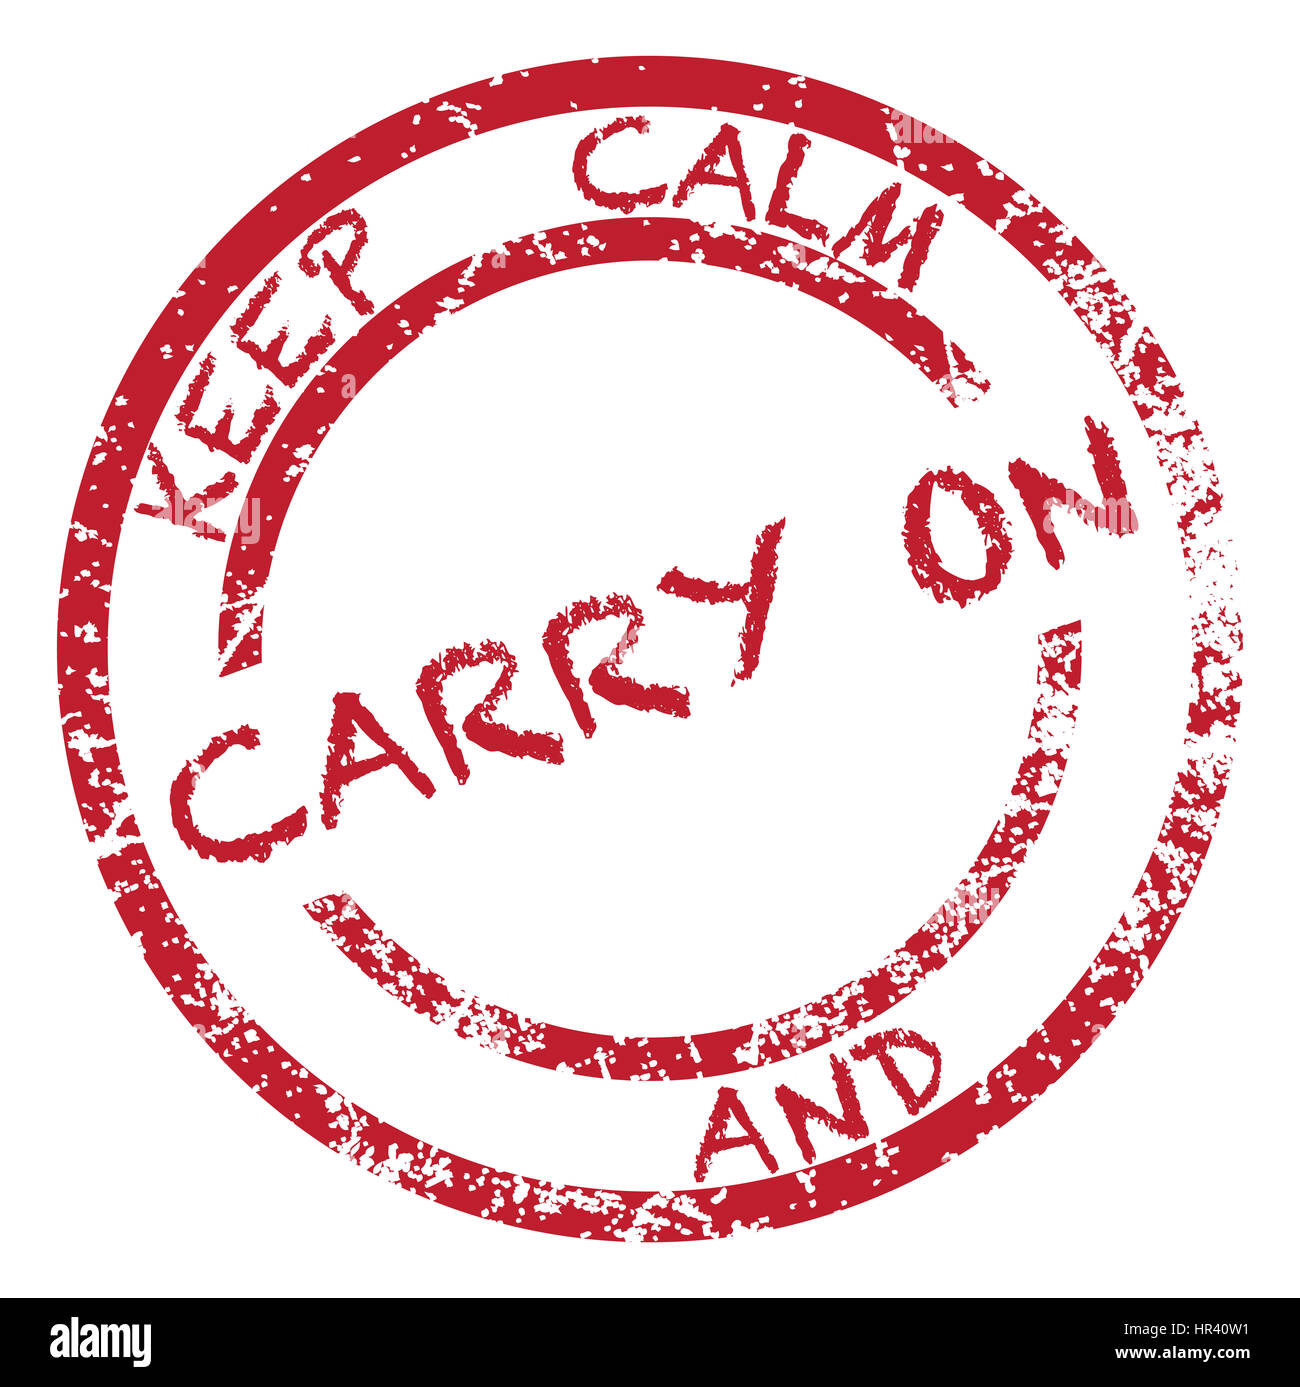 A keep calm and carry on stamp isolated on a white background Stock Photo